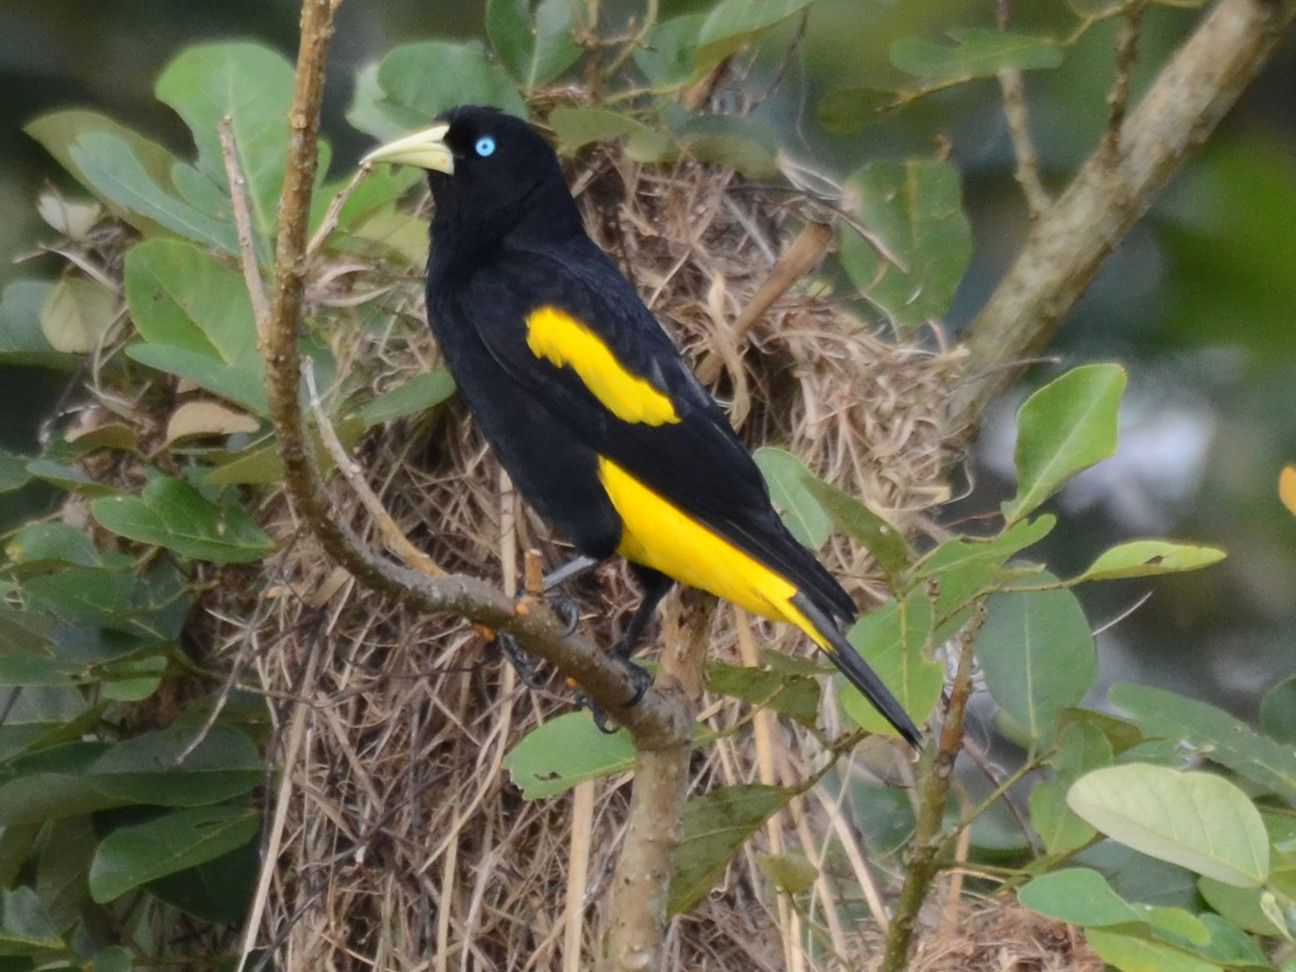 Click picture to see more Yellow-rumped Caciques.